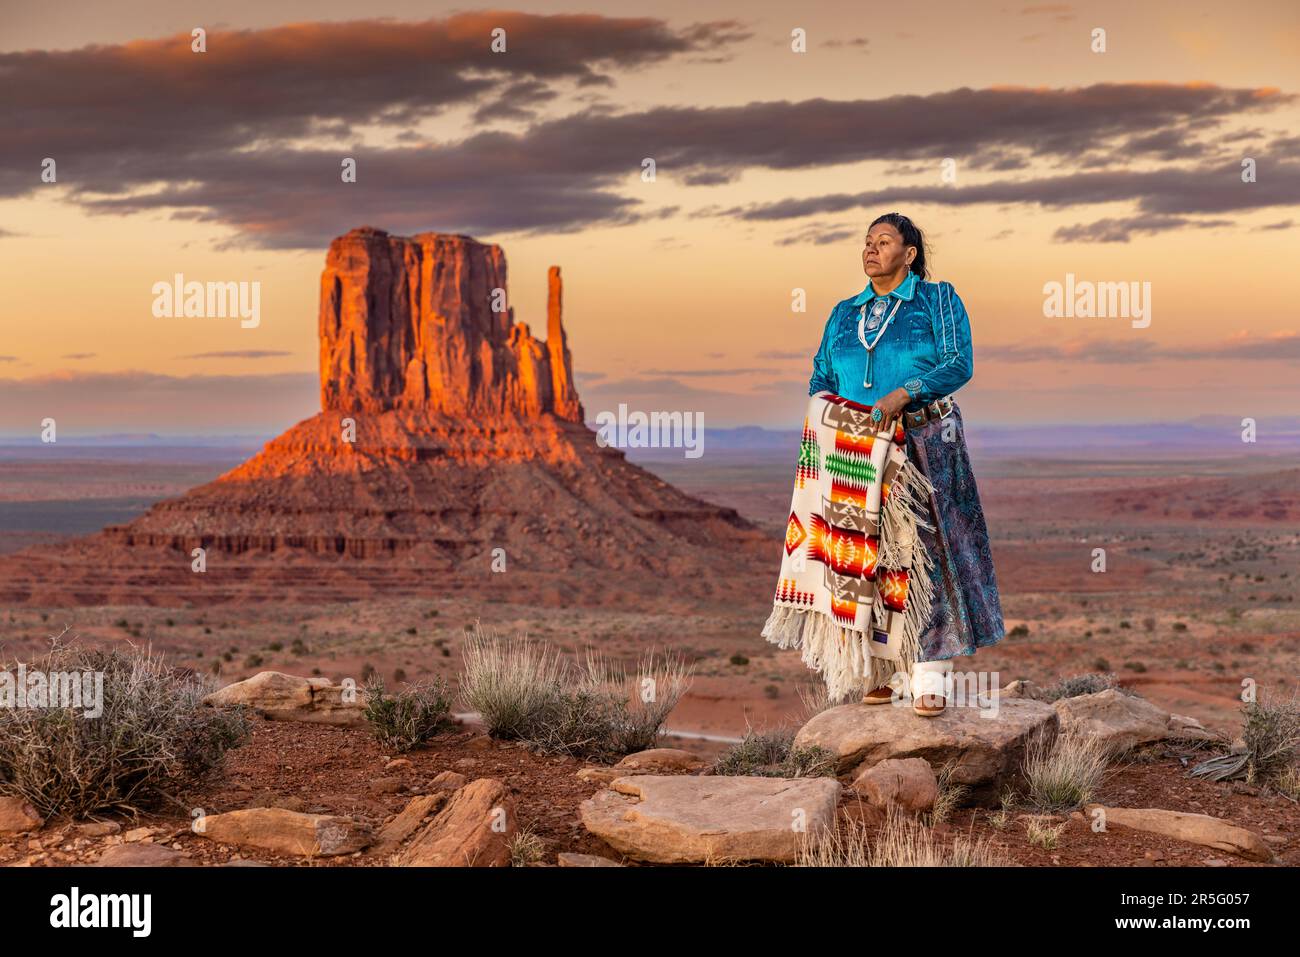 American Indian Navajo woman posing during sunset at Monument Valley sunset, Arizona, United States Stock Photo